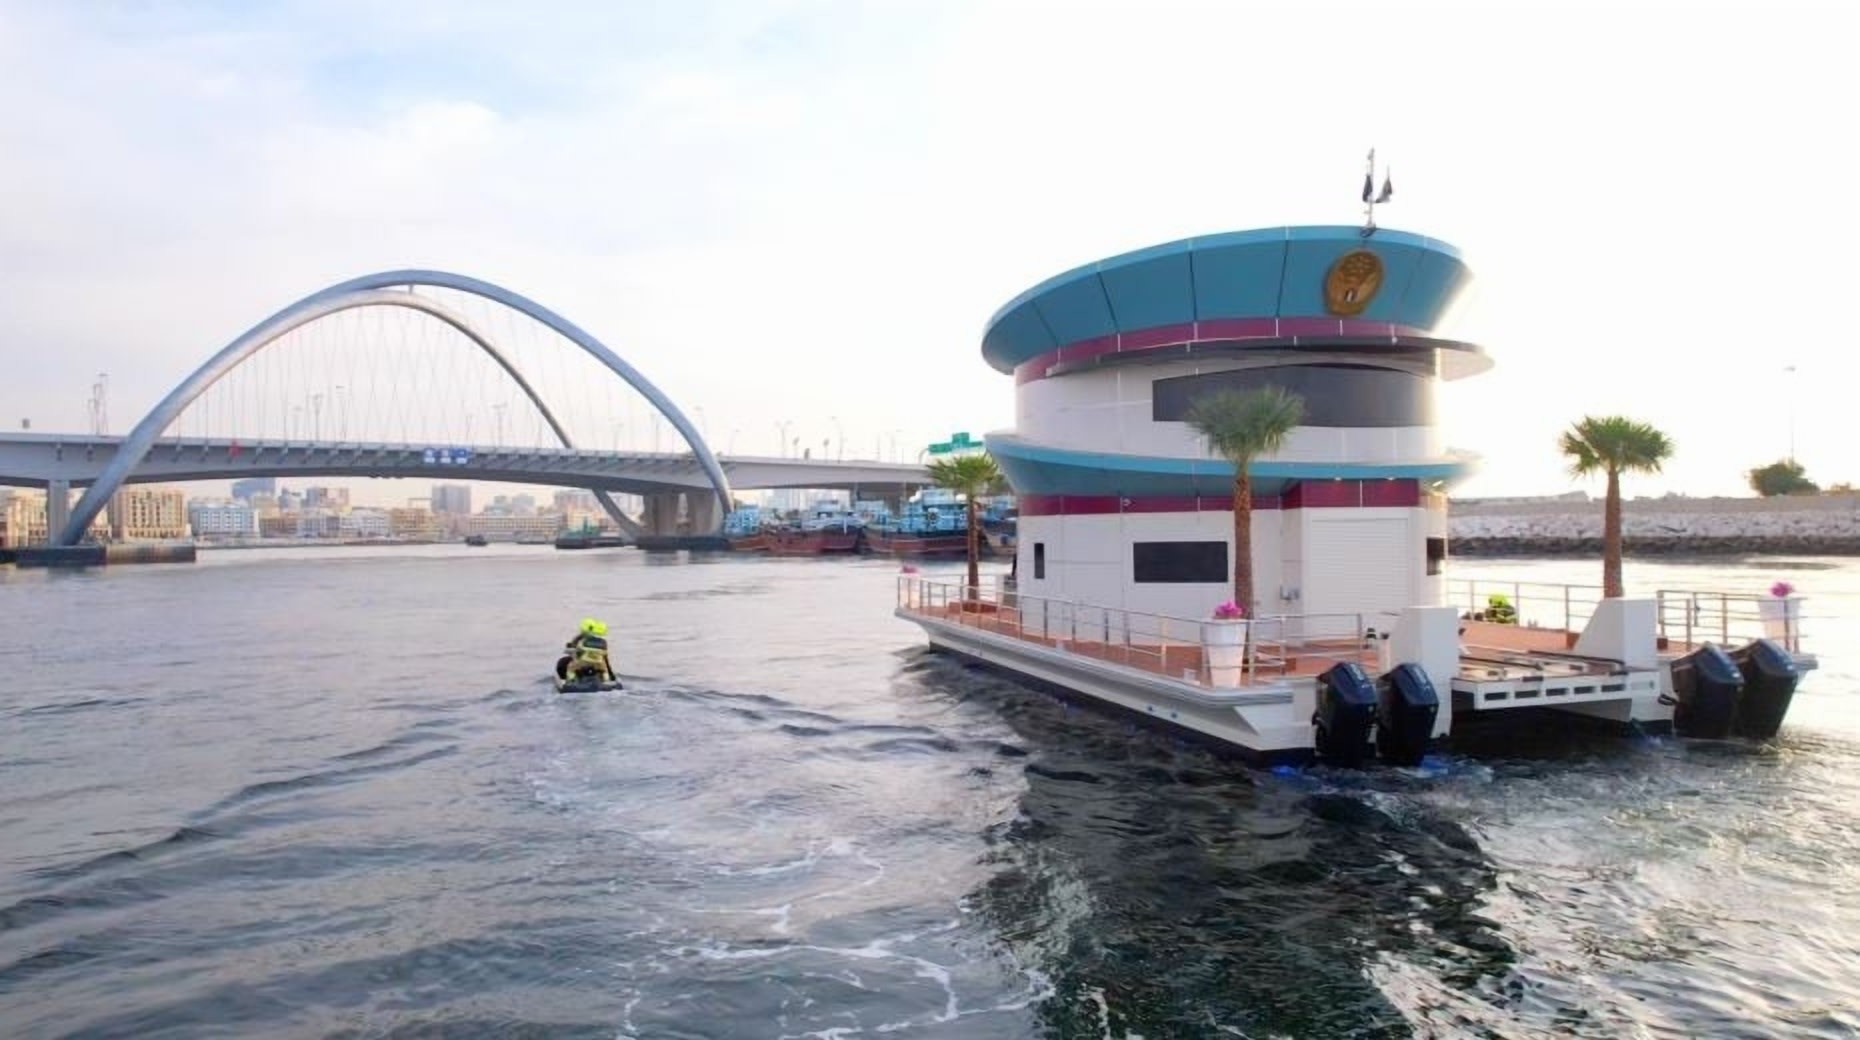 KnowESG_Dubai's First Sustainable Floating Fire Station | UAE and sustainability